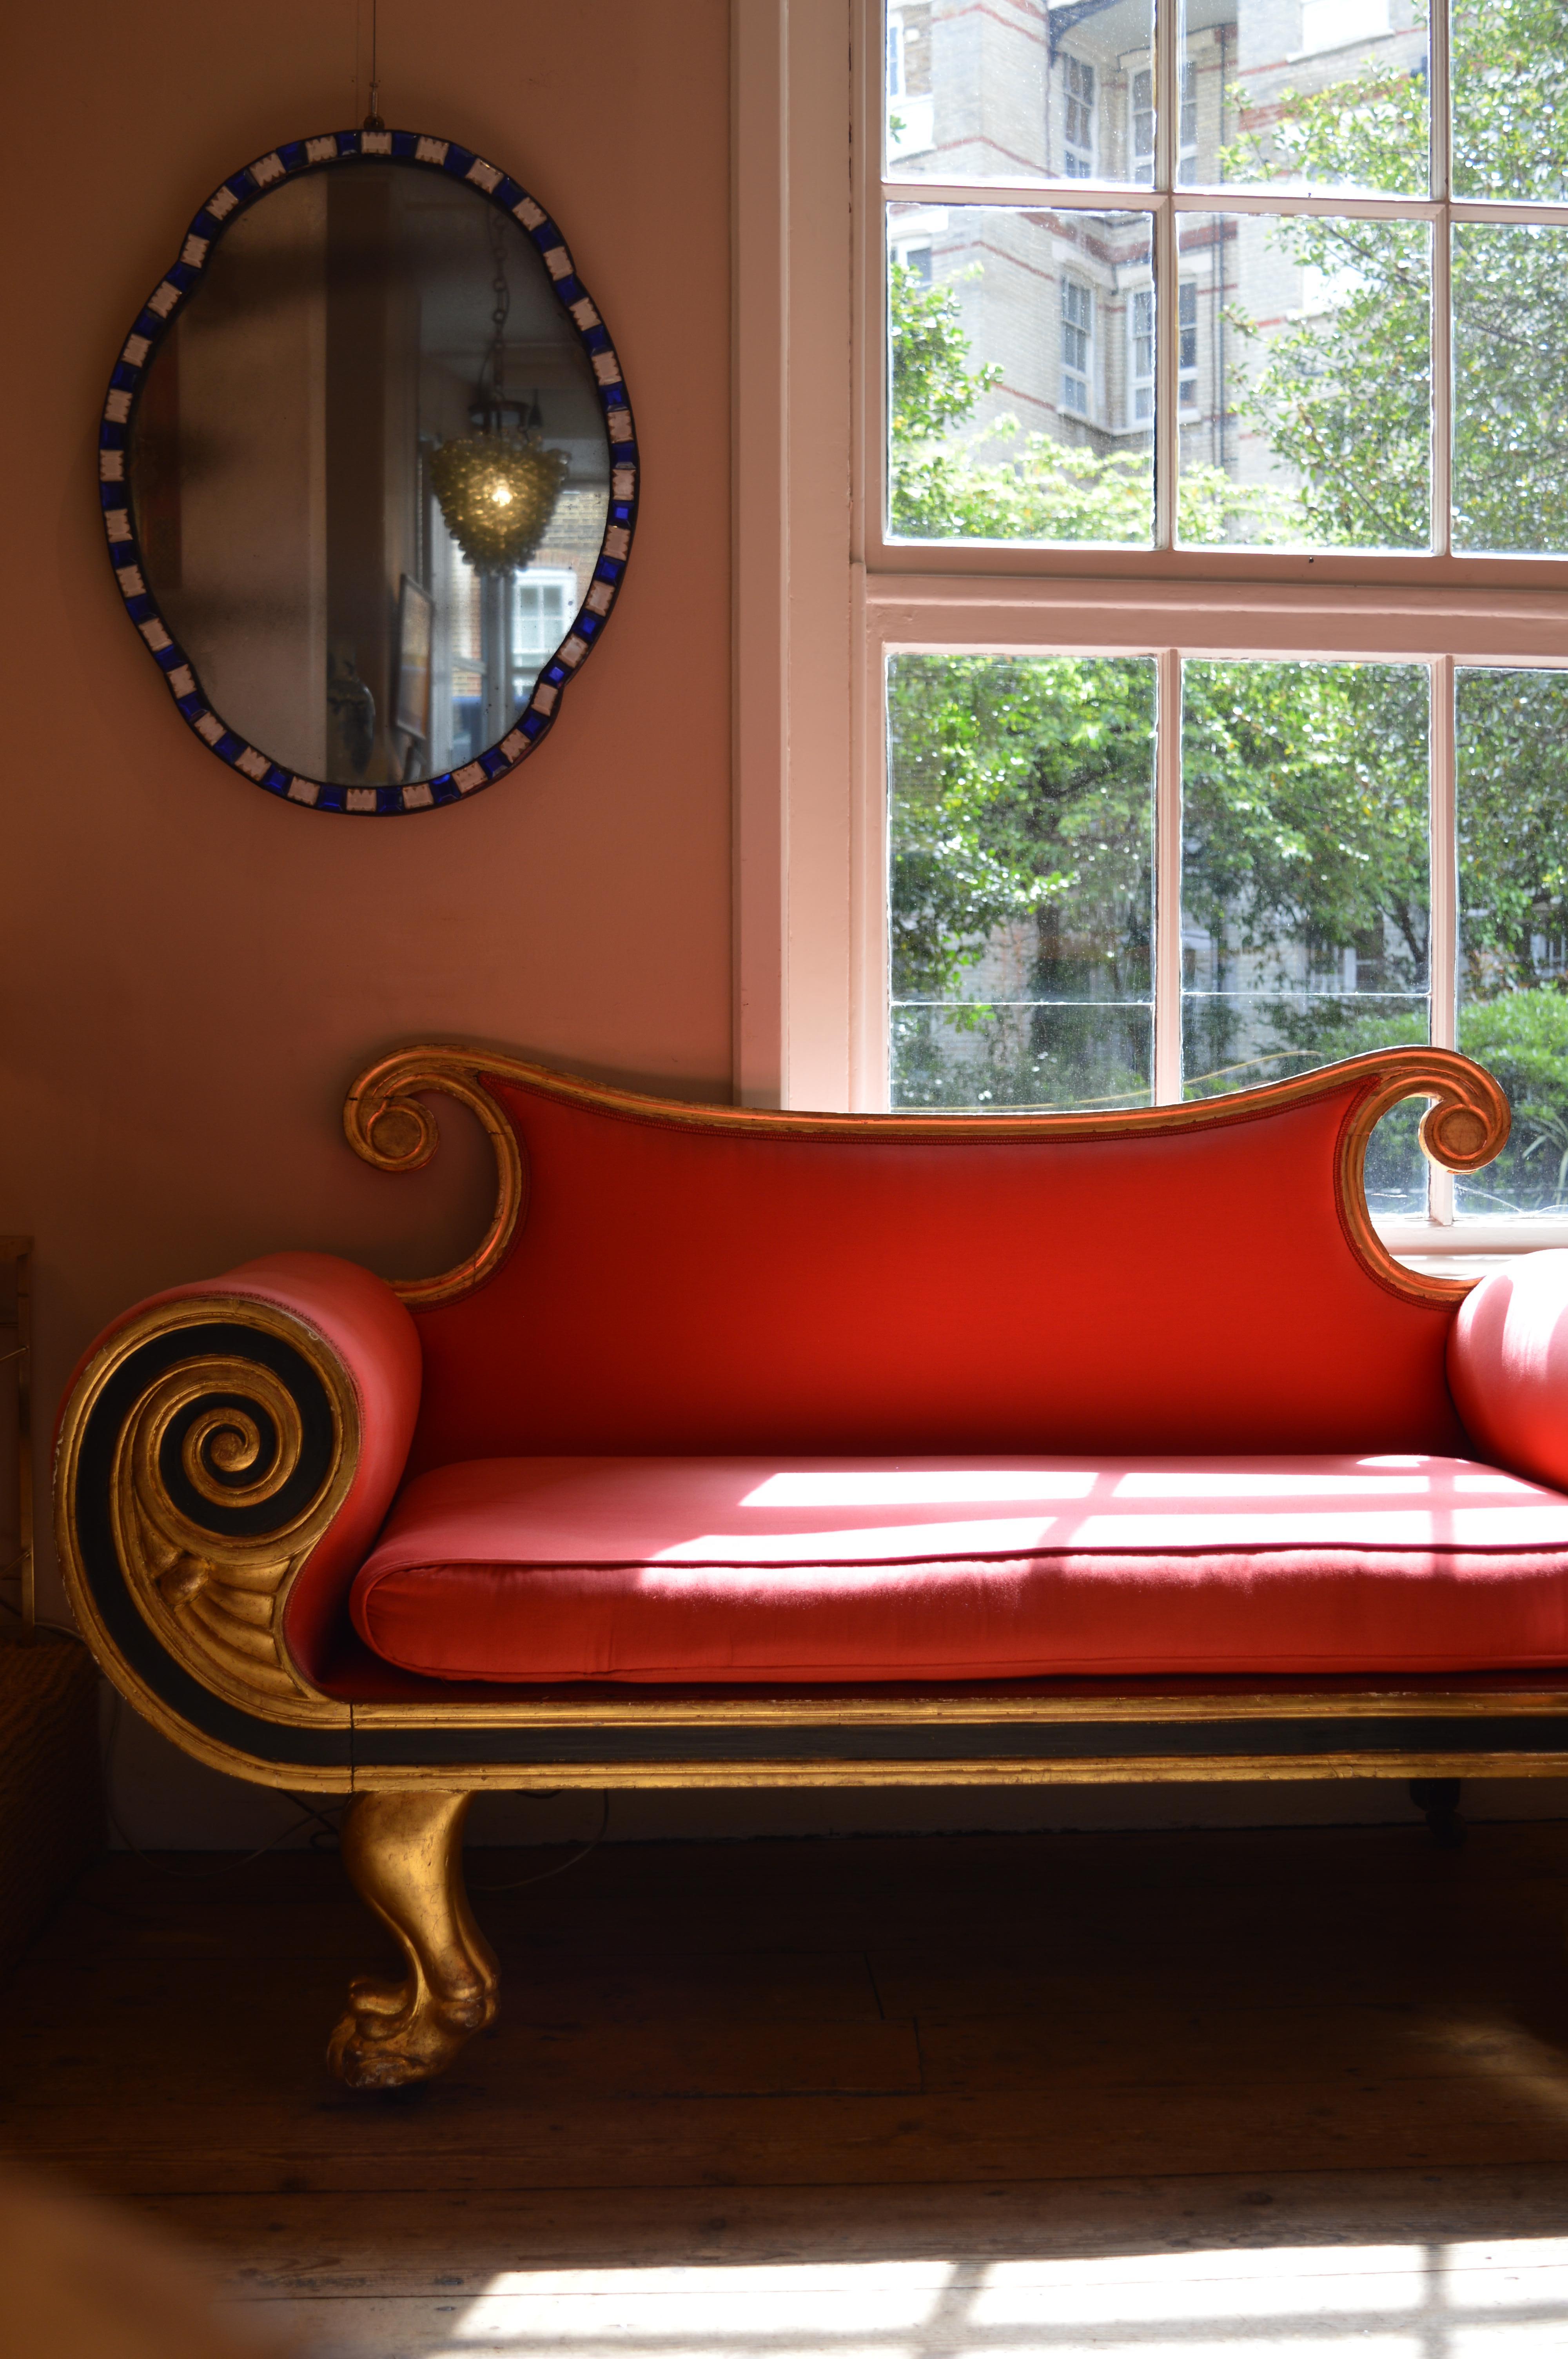 A fine early 19th century daybed with scrolled back rails and exaggerated circular armrests, supported on boldly carved hairy paw feet. Upholstered in a vivid red fabric.